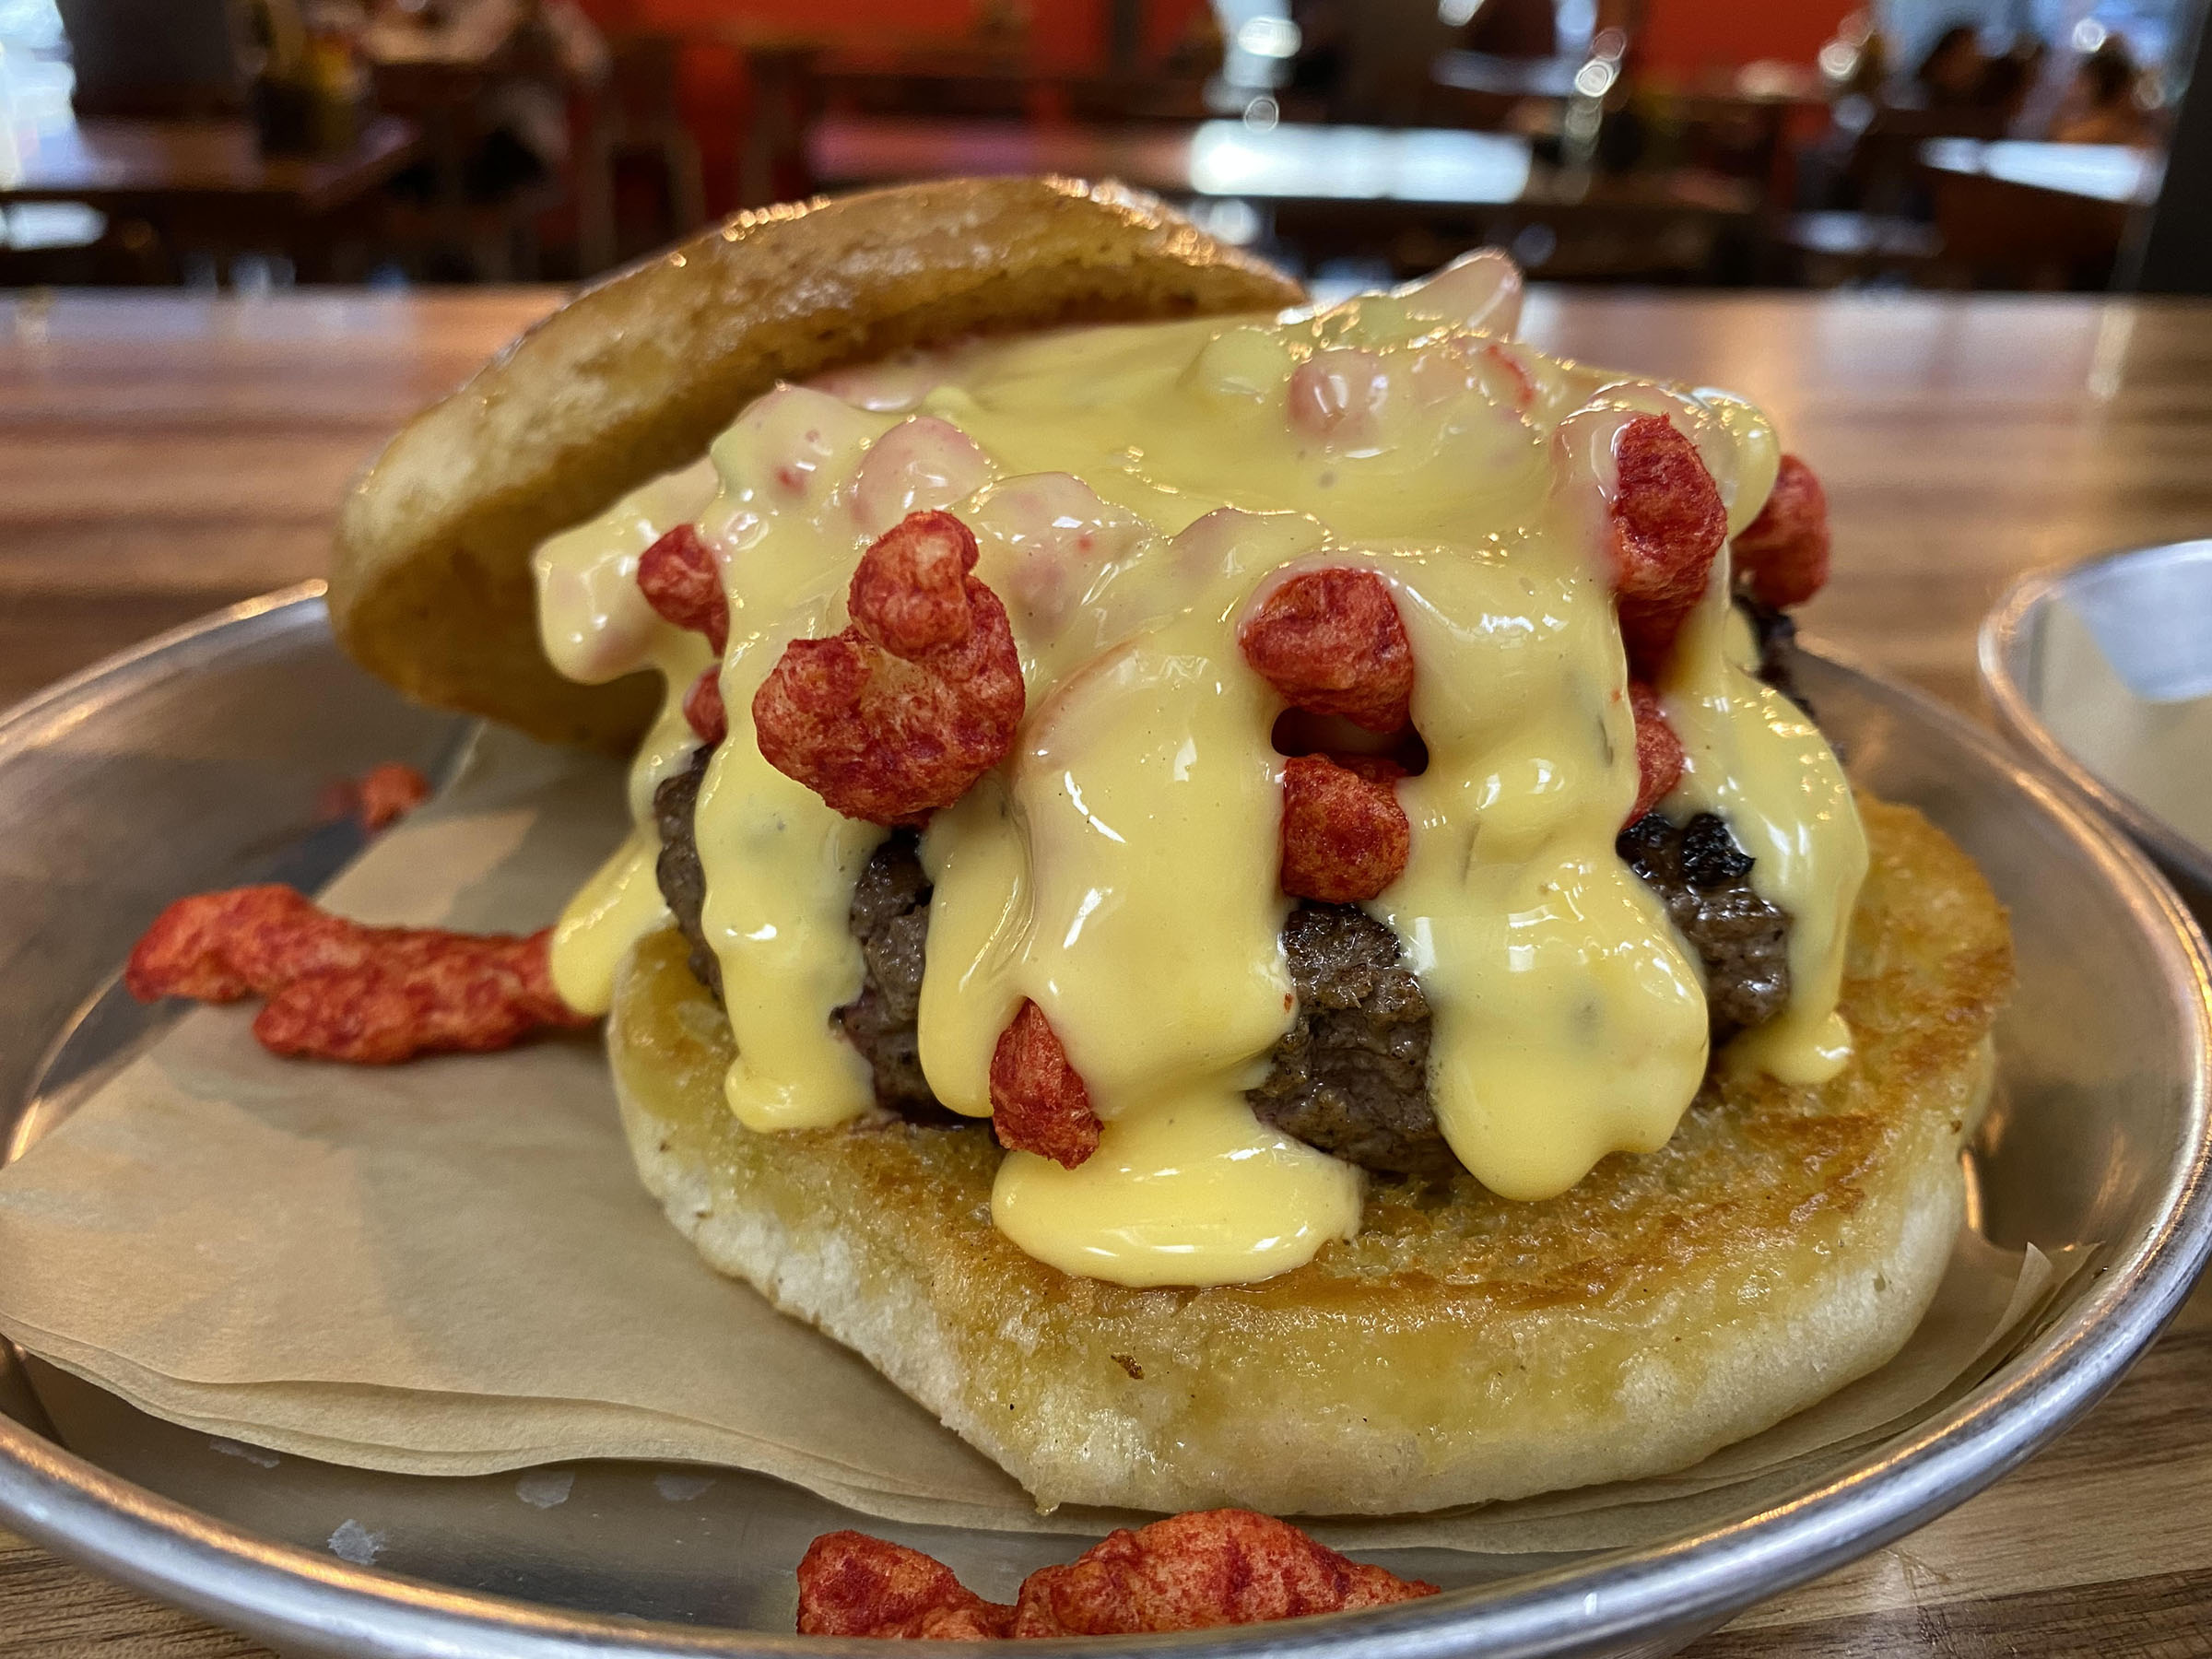 A burger patty piled high with meat, queso, and Flamin' Hot Cheetos